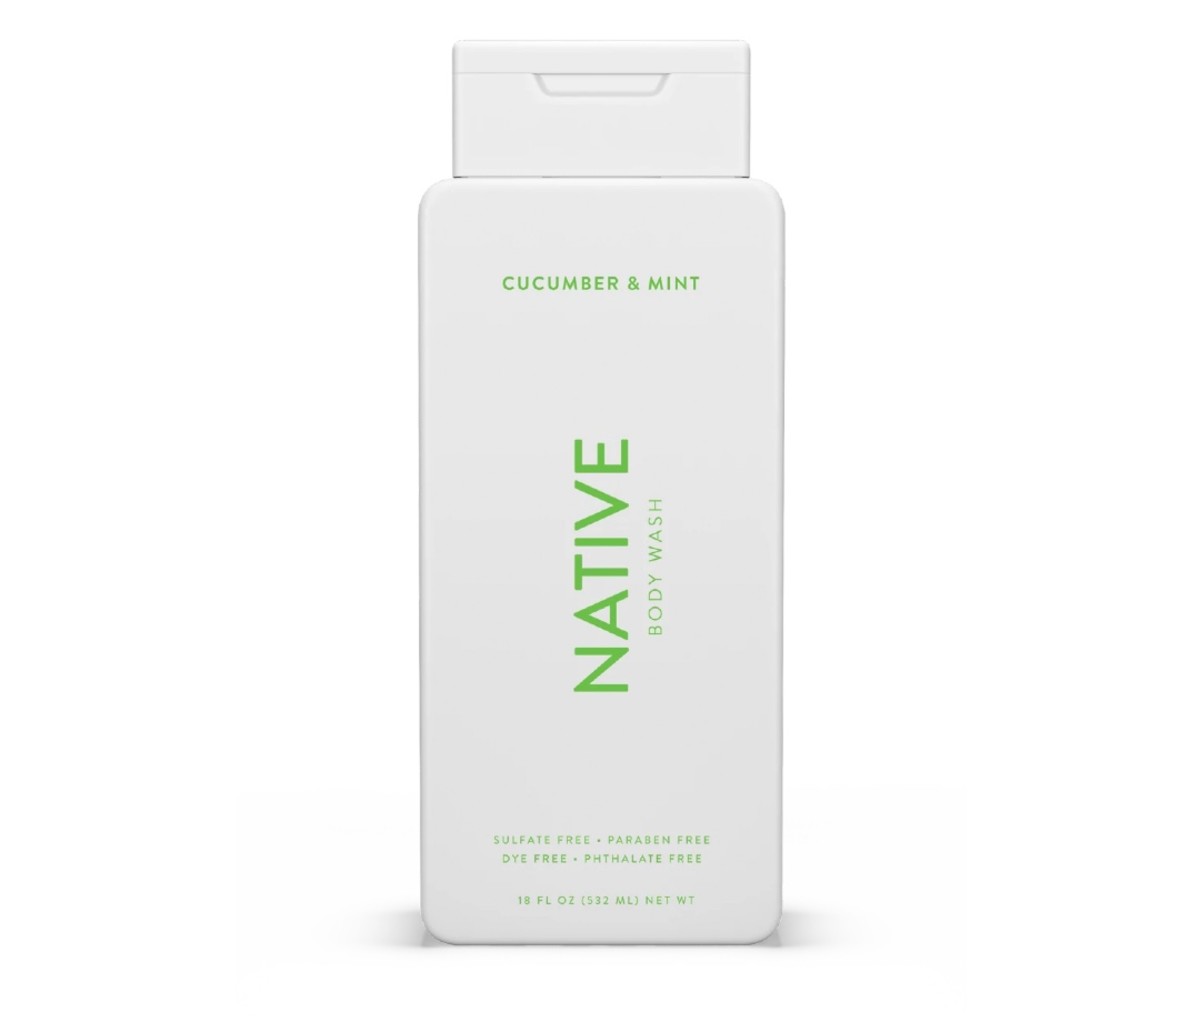 Native’s Cucumber and Mint Body Wash